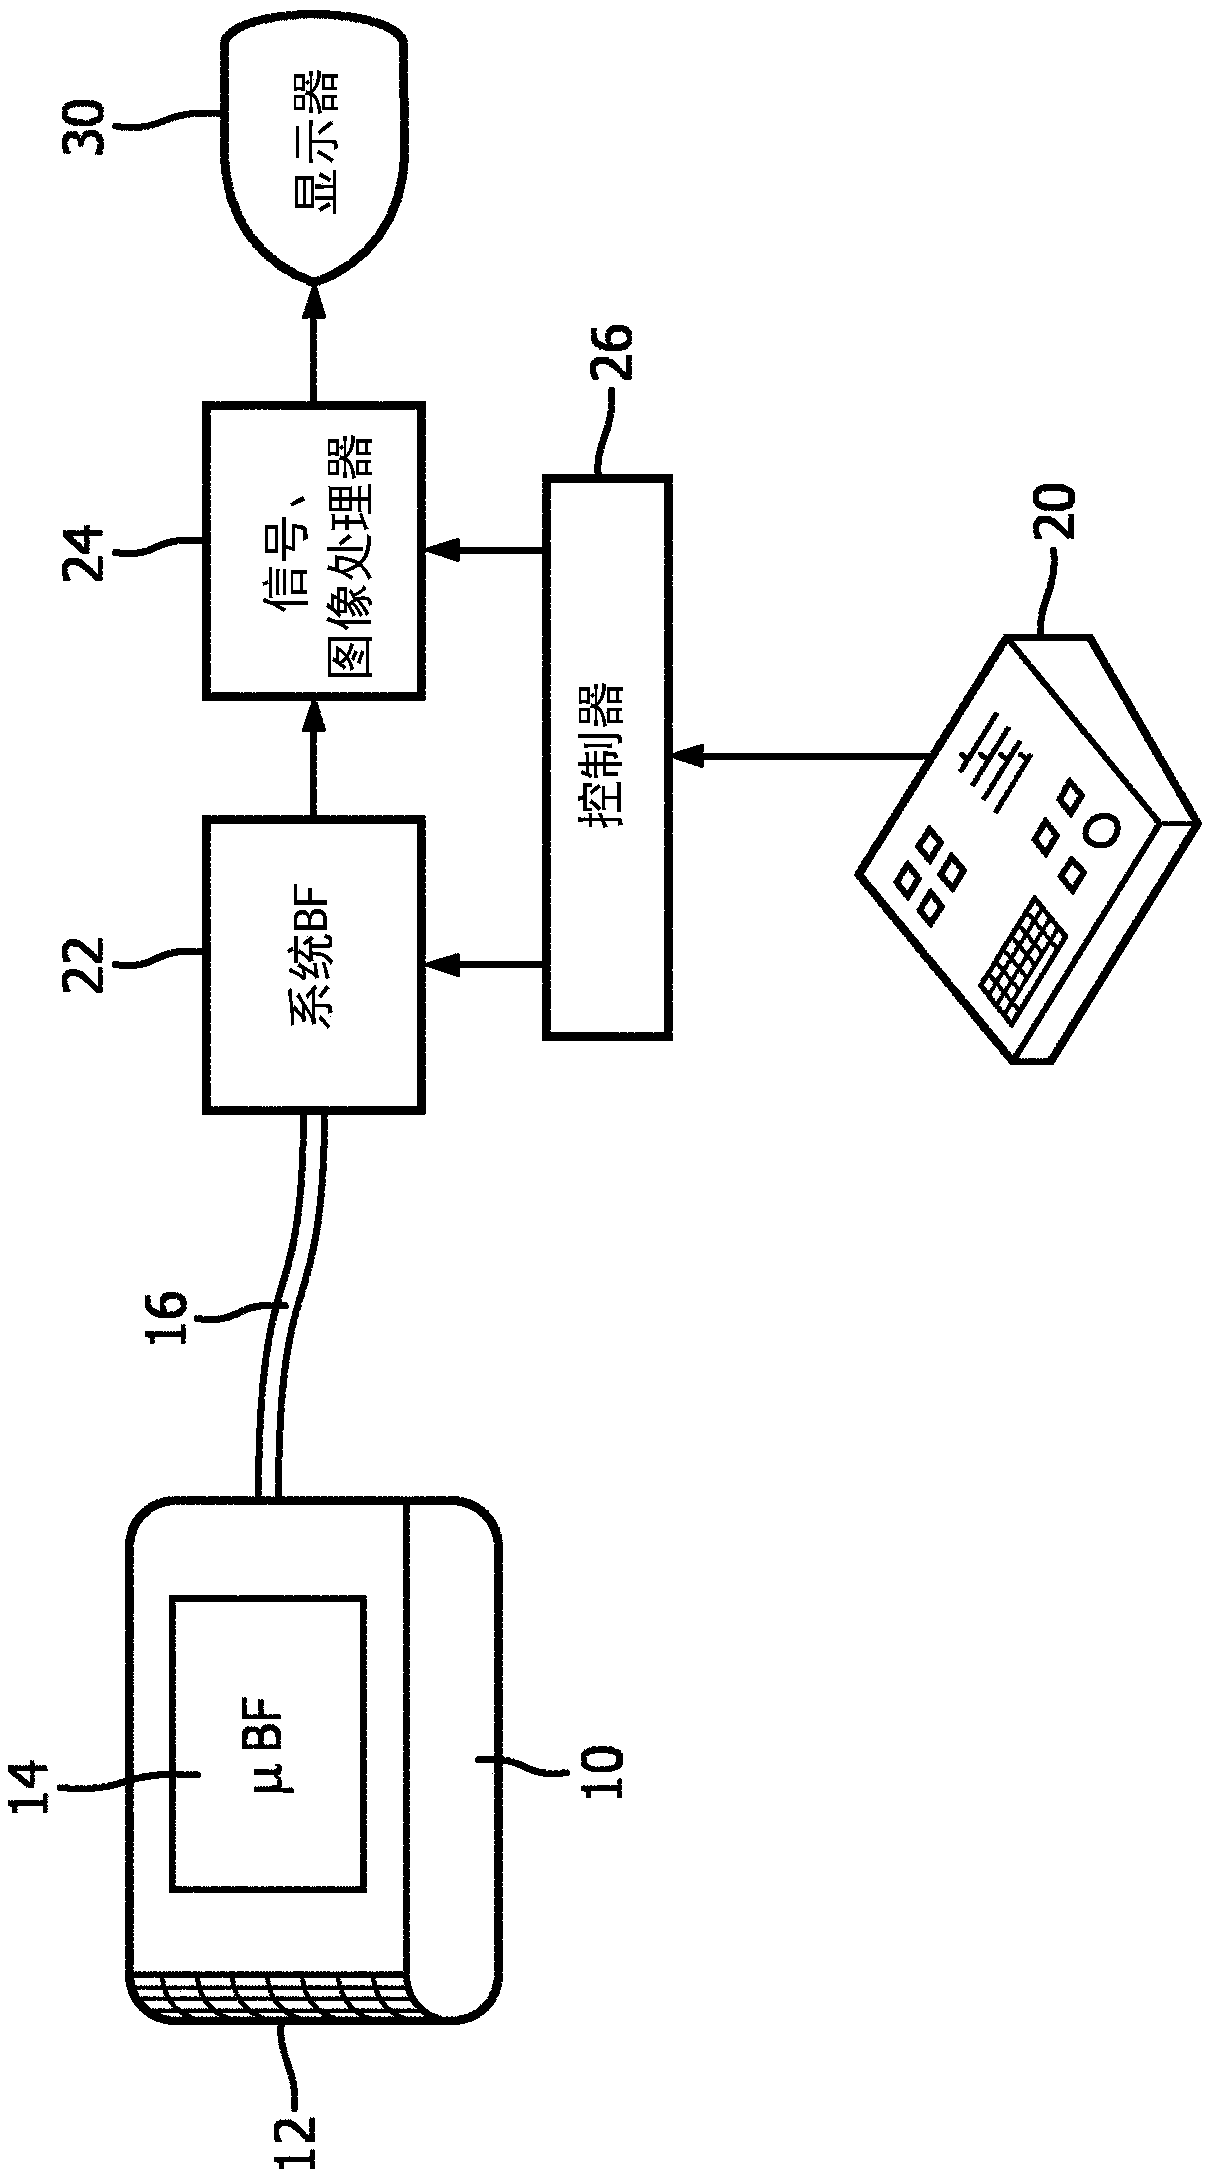 Ultrasound probe with low frequency, low voltage digital microbeamformer